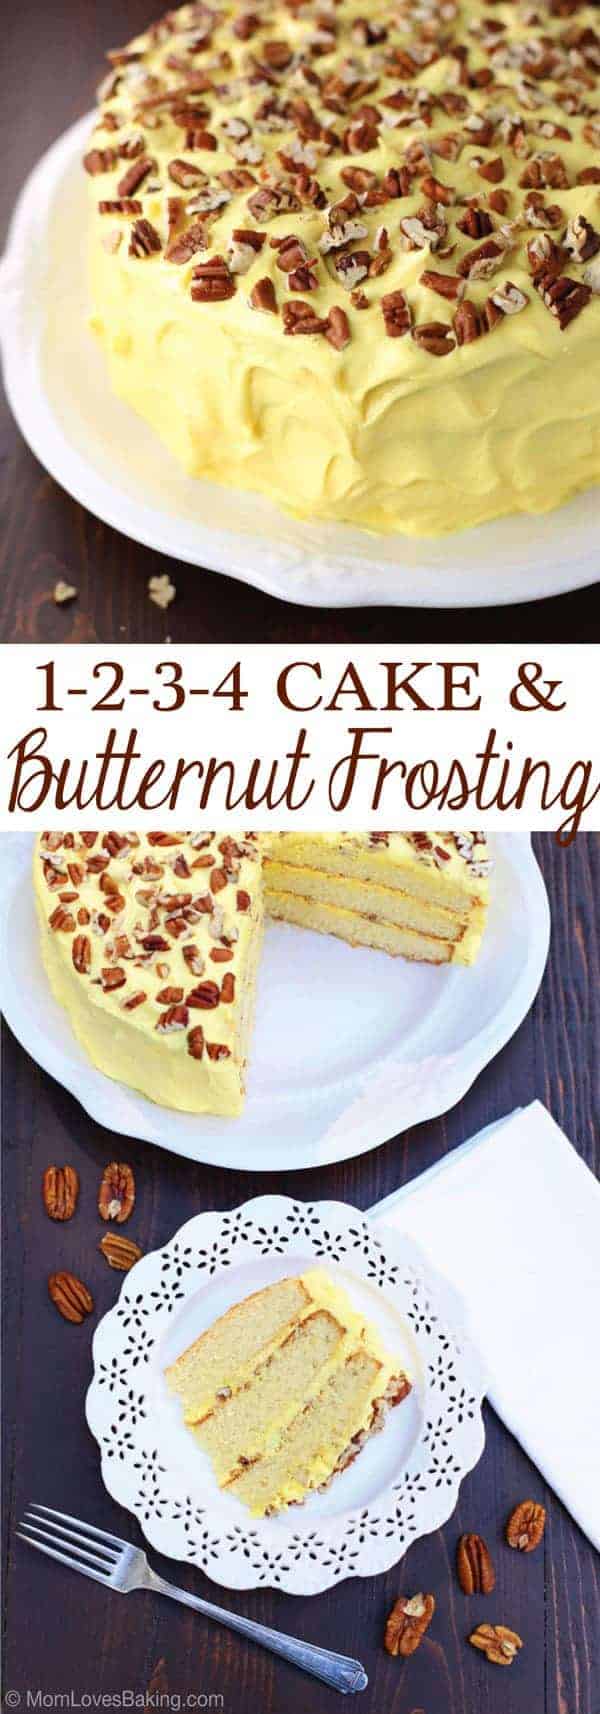 1-2-3-4 Cake with Butternut Frosting